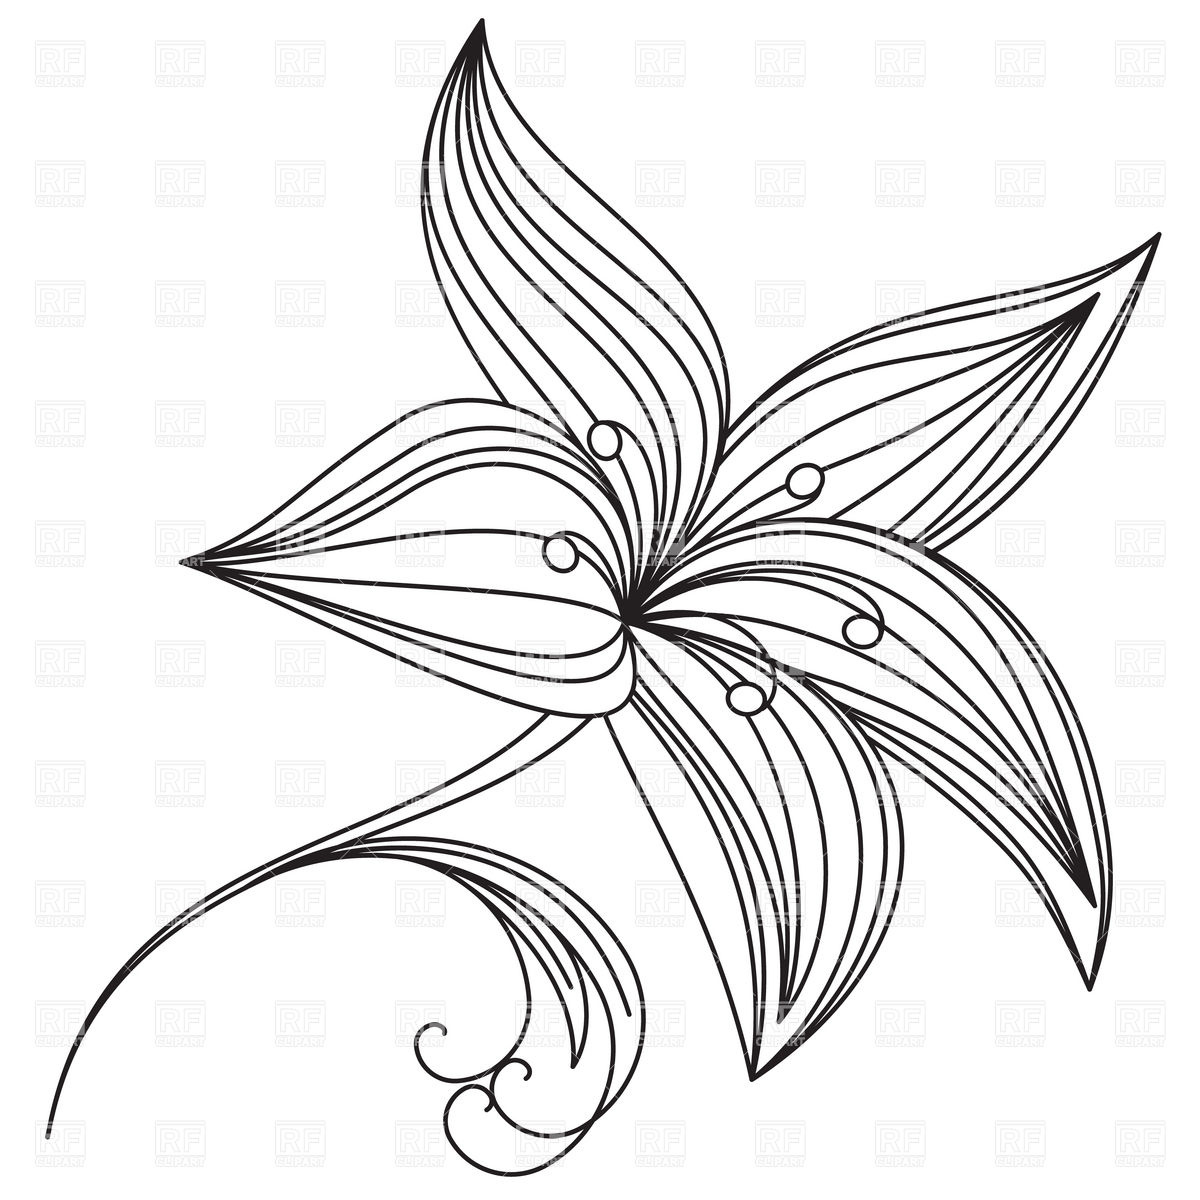 Flower Of Lily Outline 16294 Download Royalty Free Vector Clipart